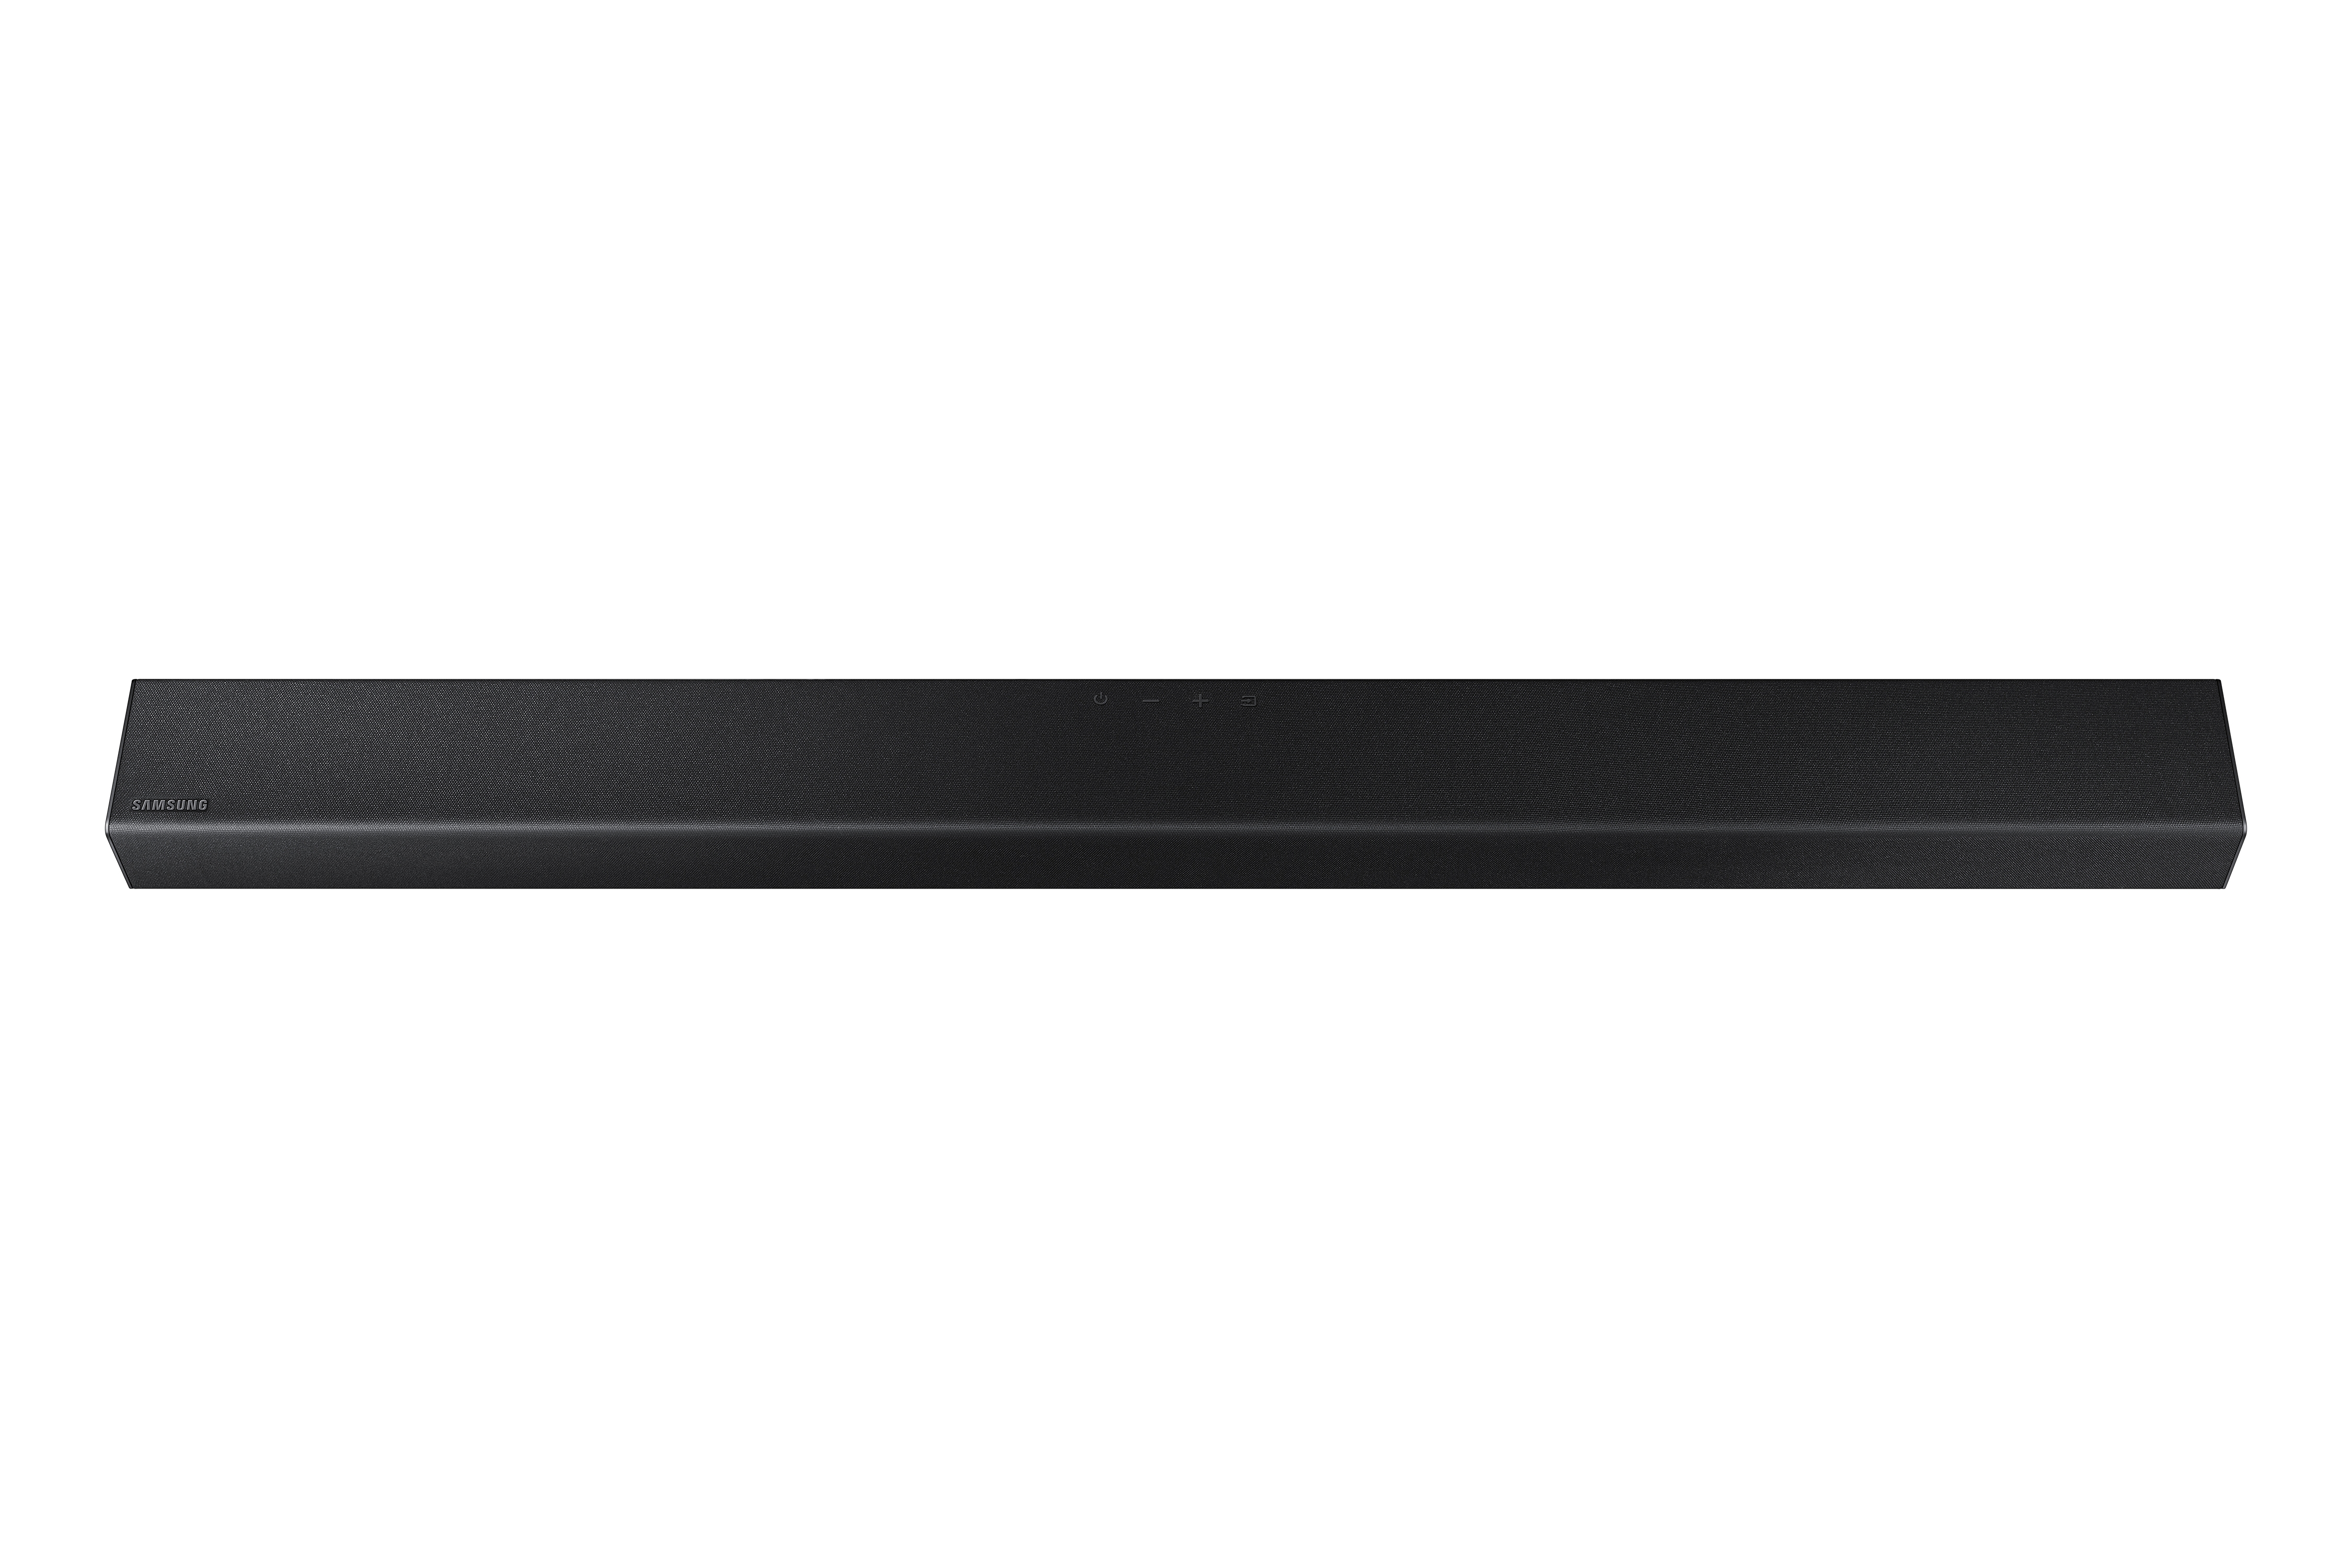 Thumbnail image of Samsung HW-T40M 170W 2.1ch Soundbar with Wireless Subwoofer (2020)